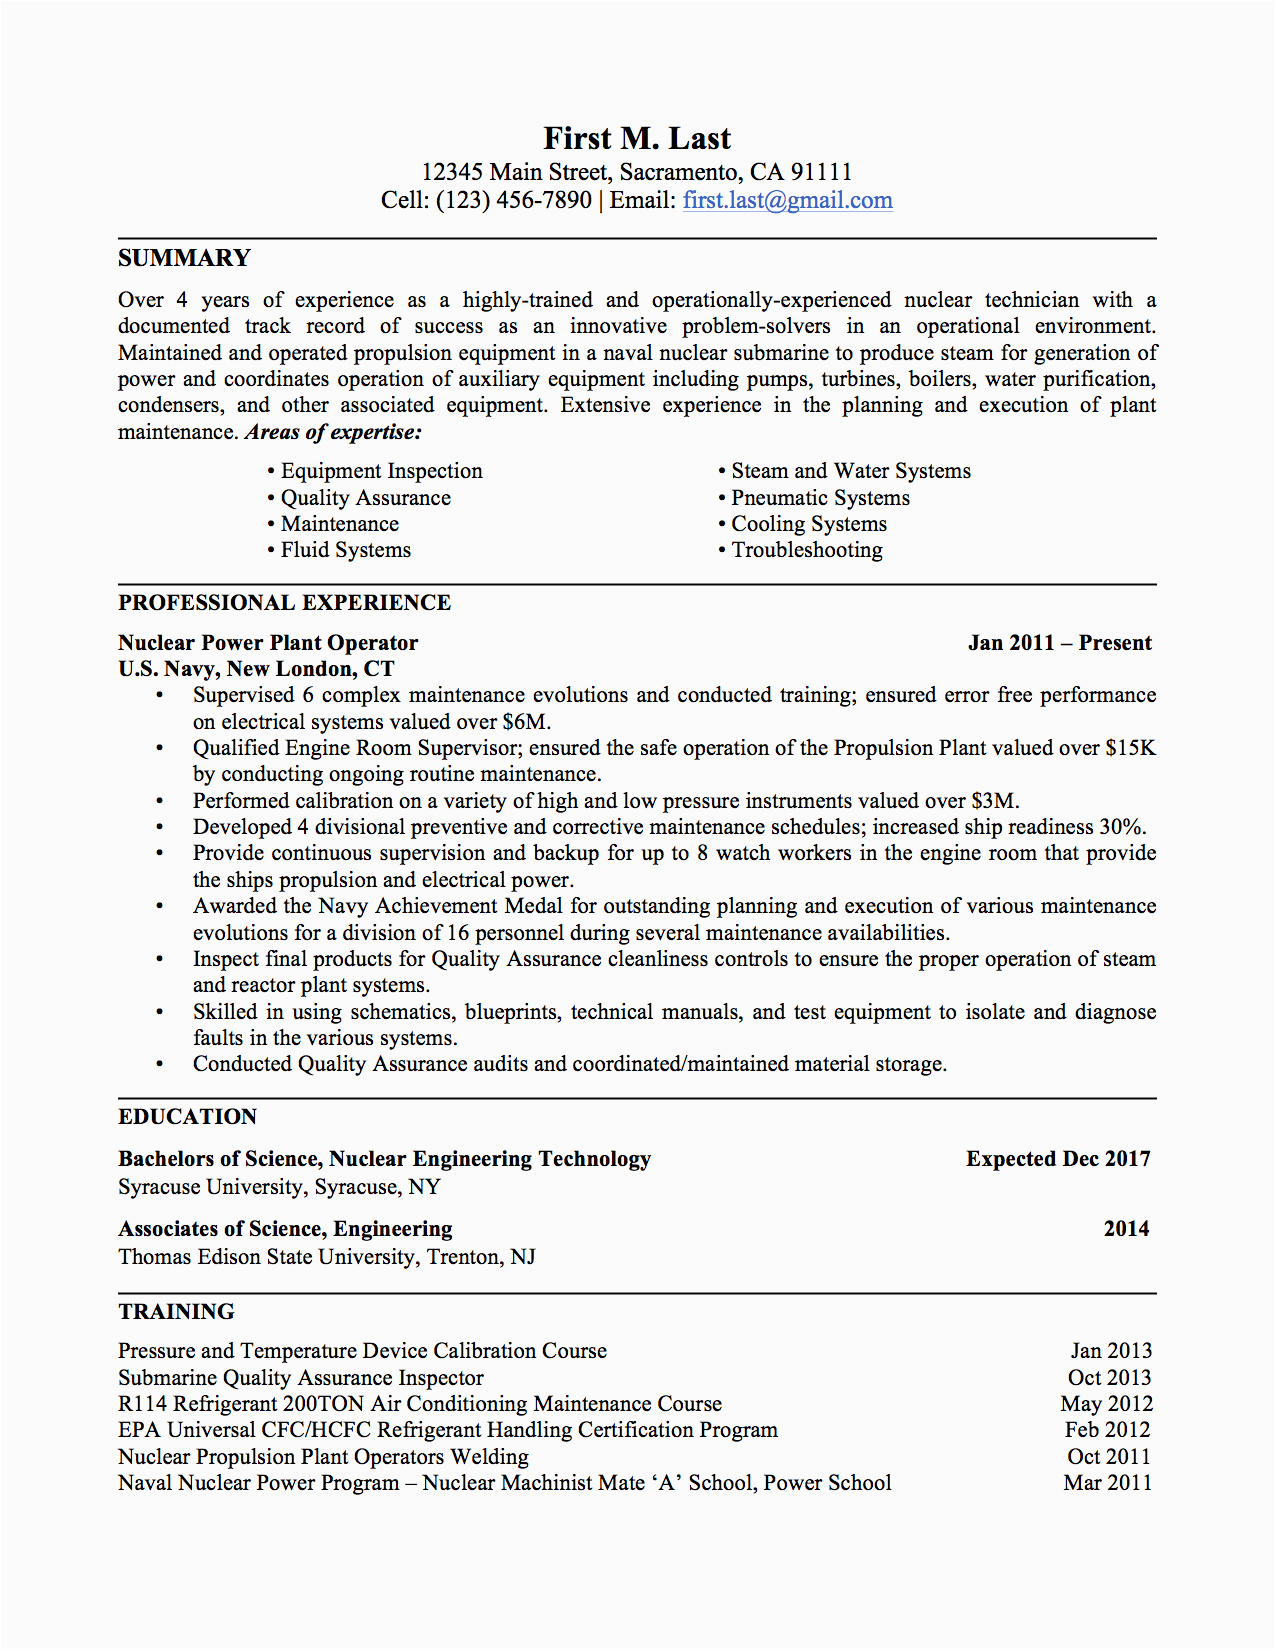 Resume Template for Military to Civilian Military to Civilian Resume Template